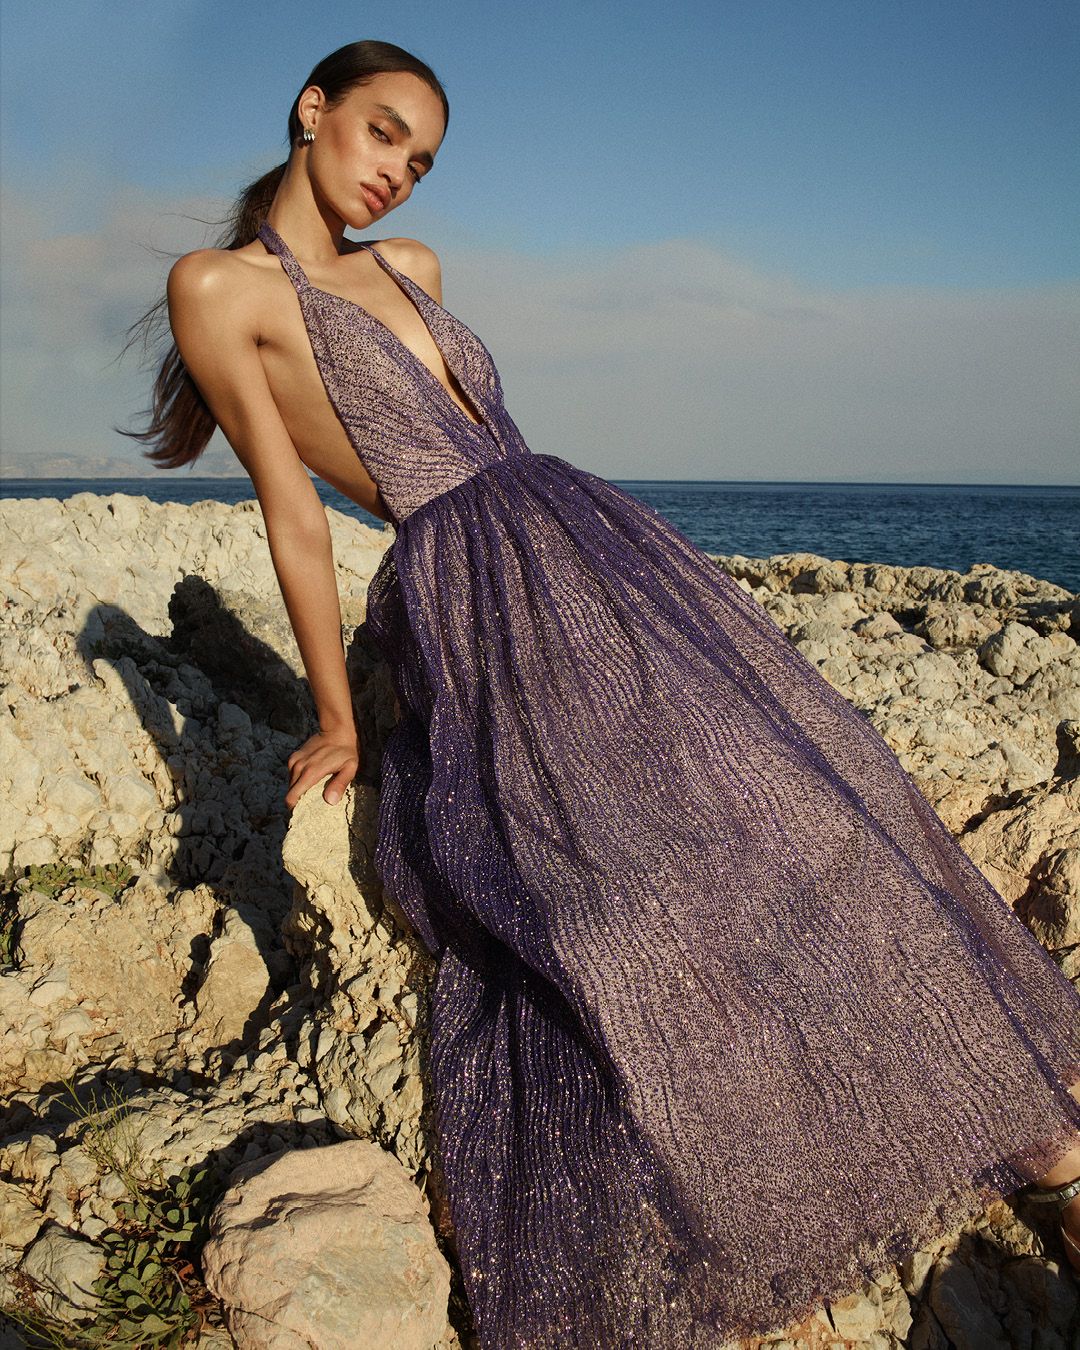 Model wearing a purple sparkly tulle gown leaning against rocks with the ocean in the background